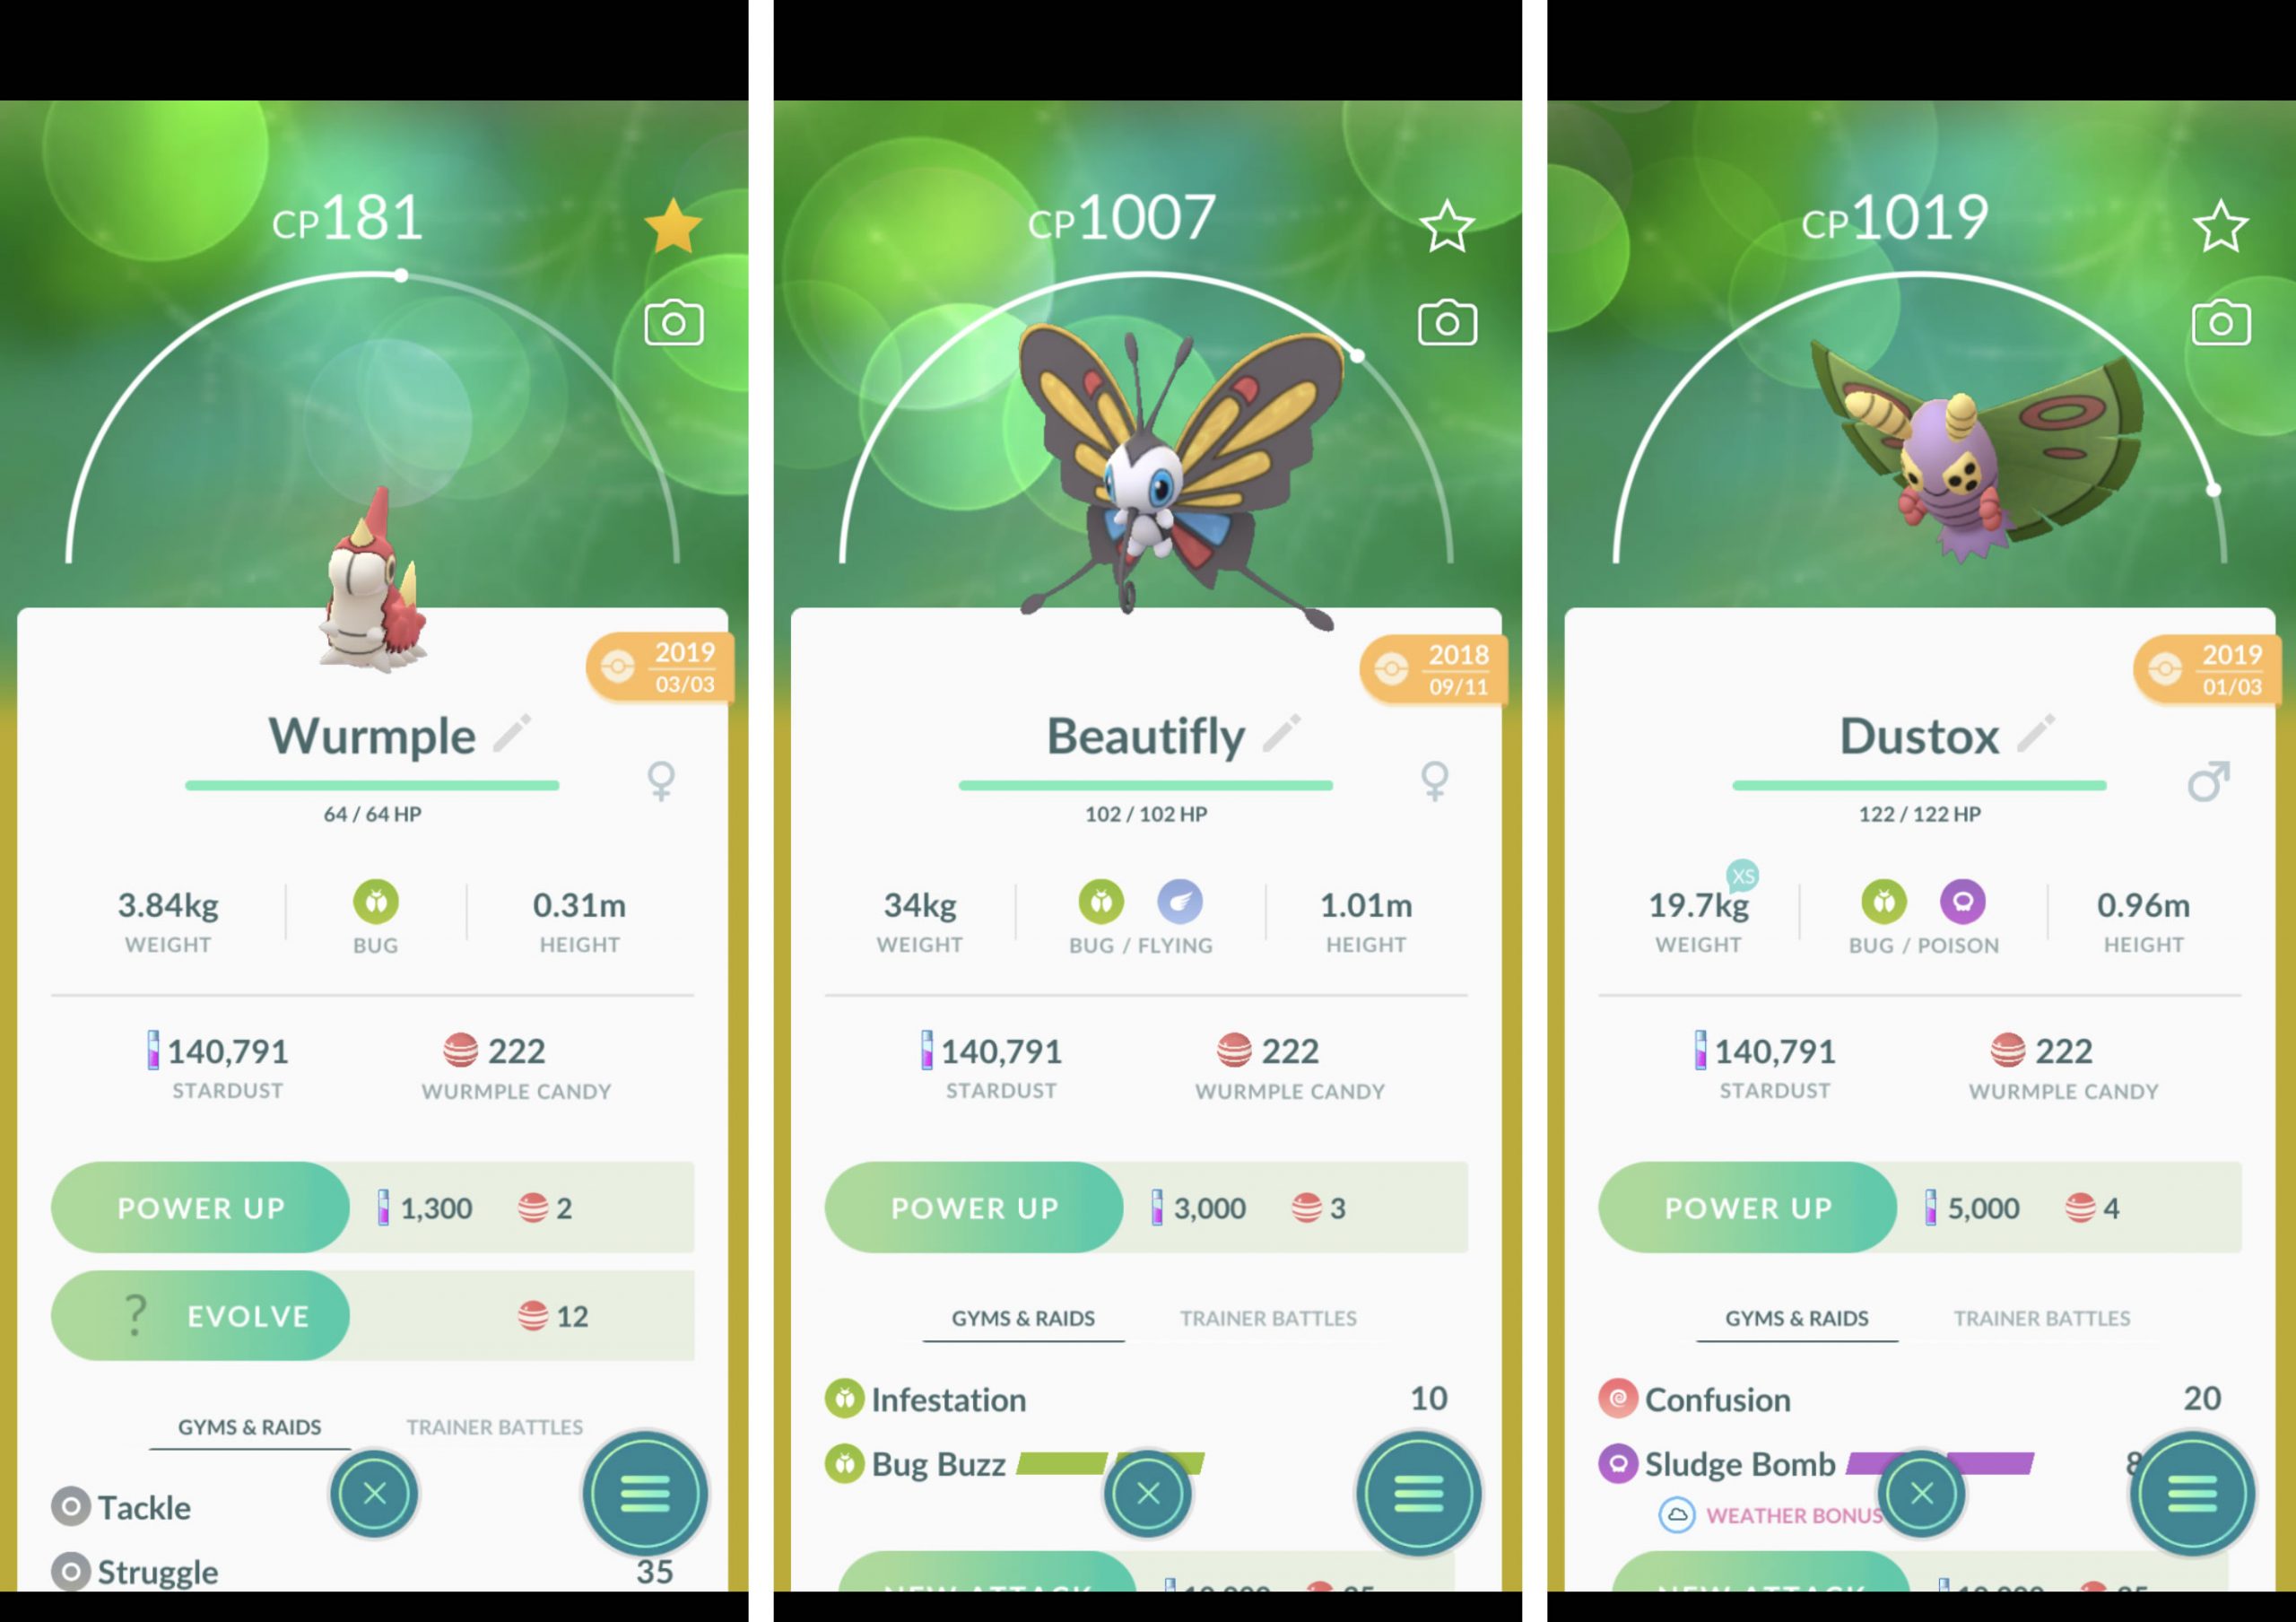 How to get Cascoon and Silcoon in Pokémon Go